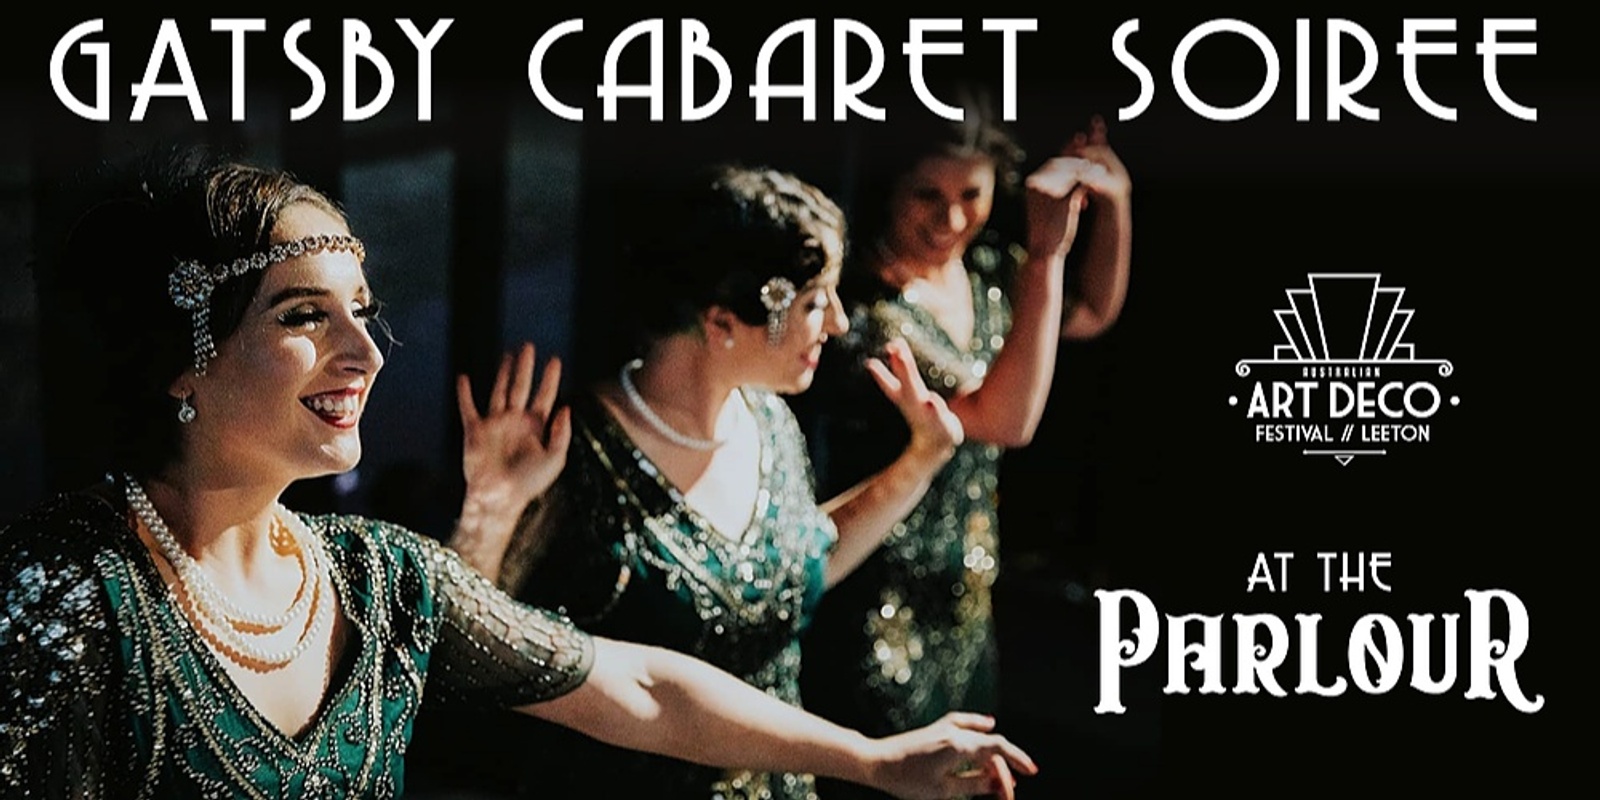 Banner image for Gatsby Cabaret Soiree at the Parlour